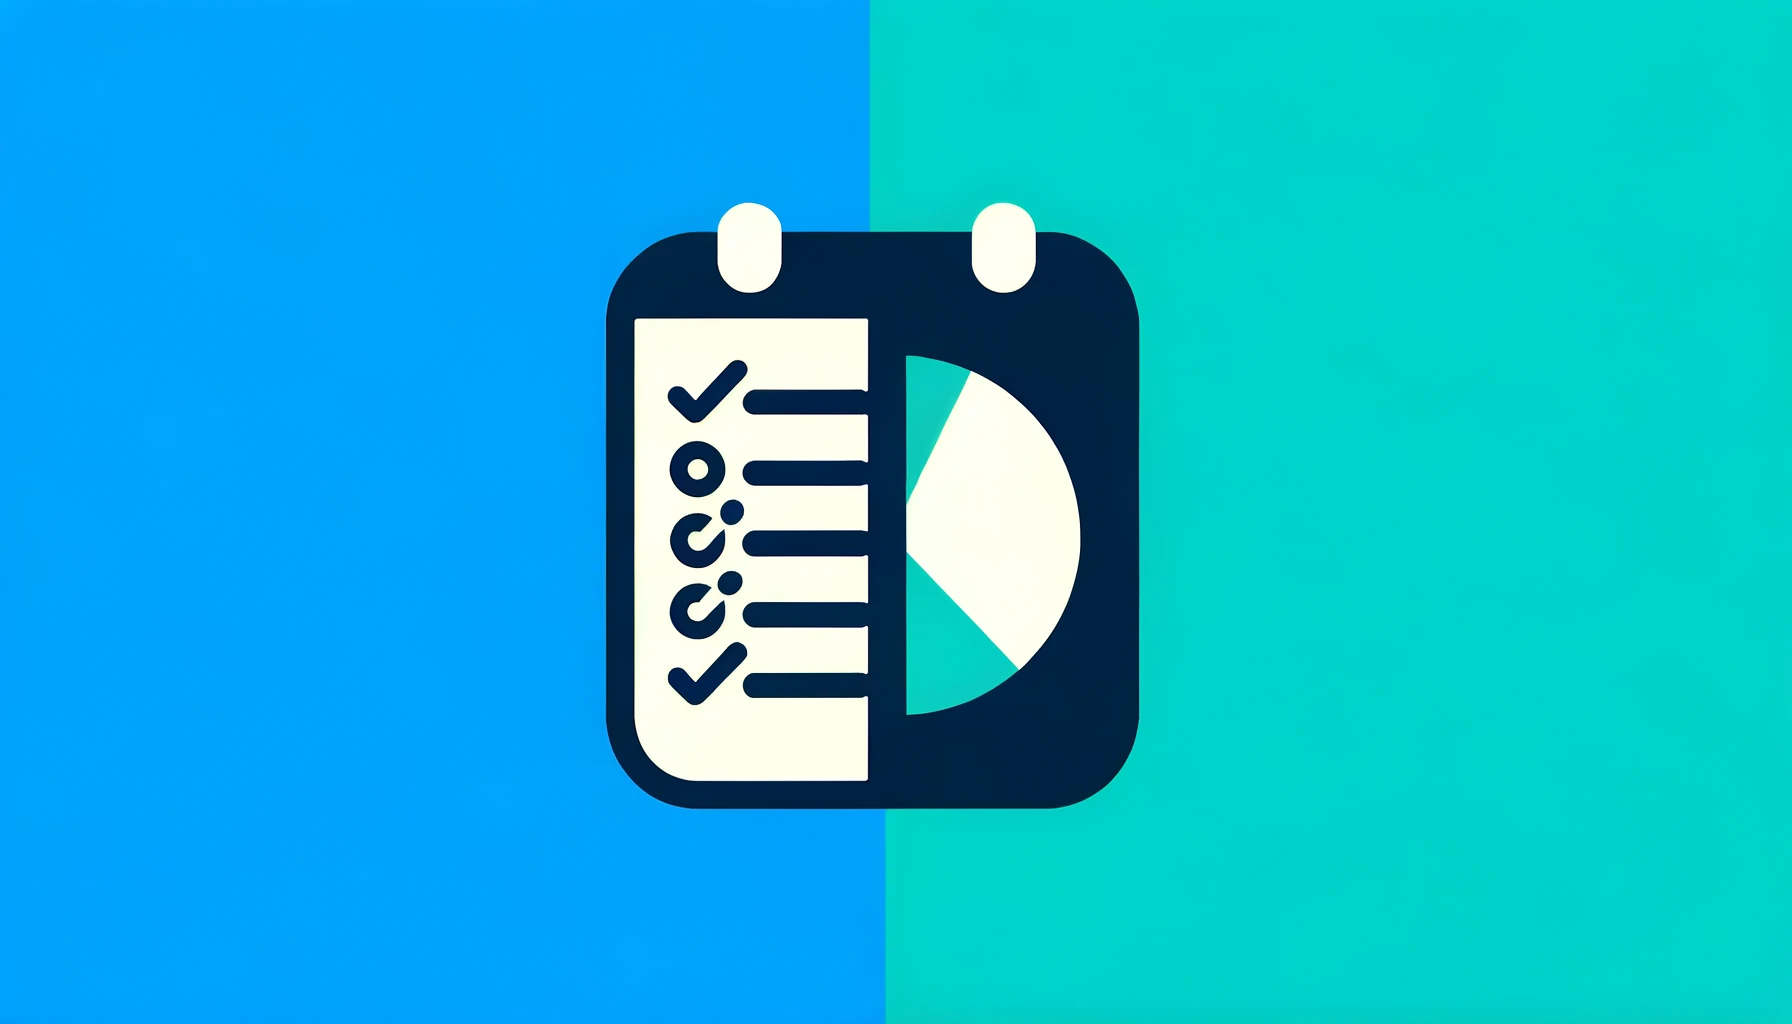 task management vs project management cover - icons for each